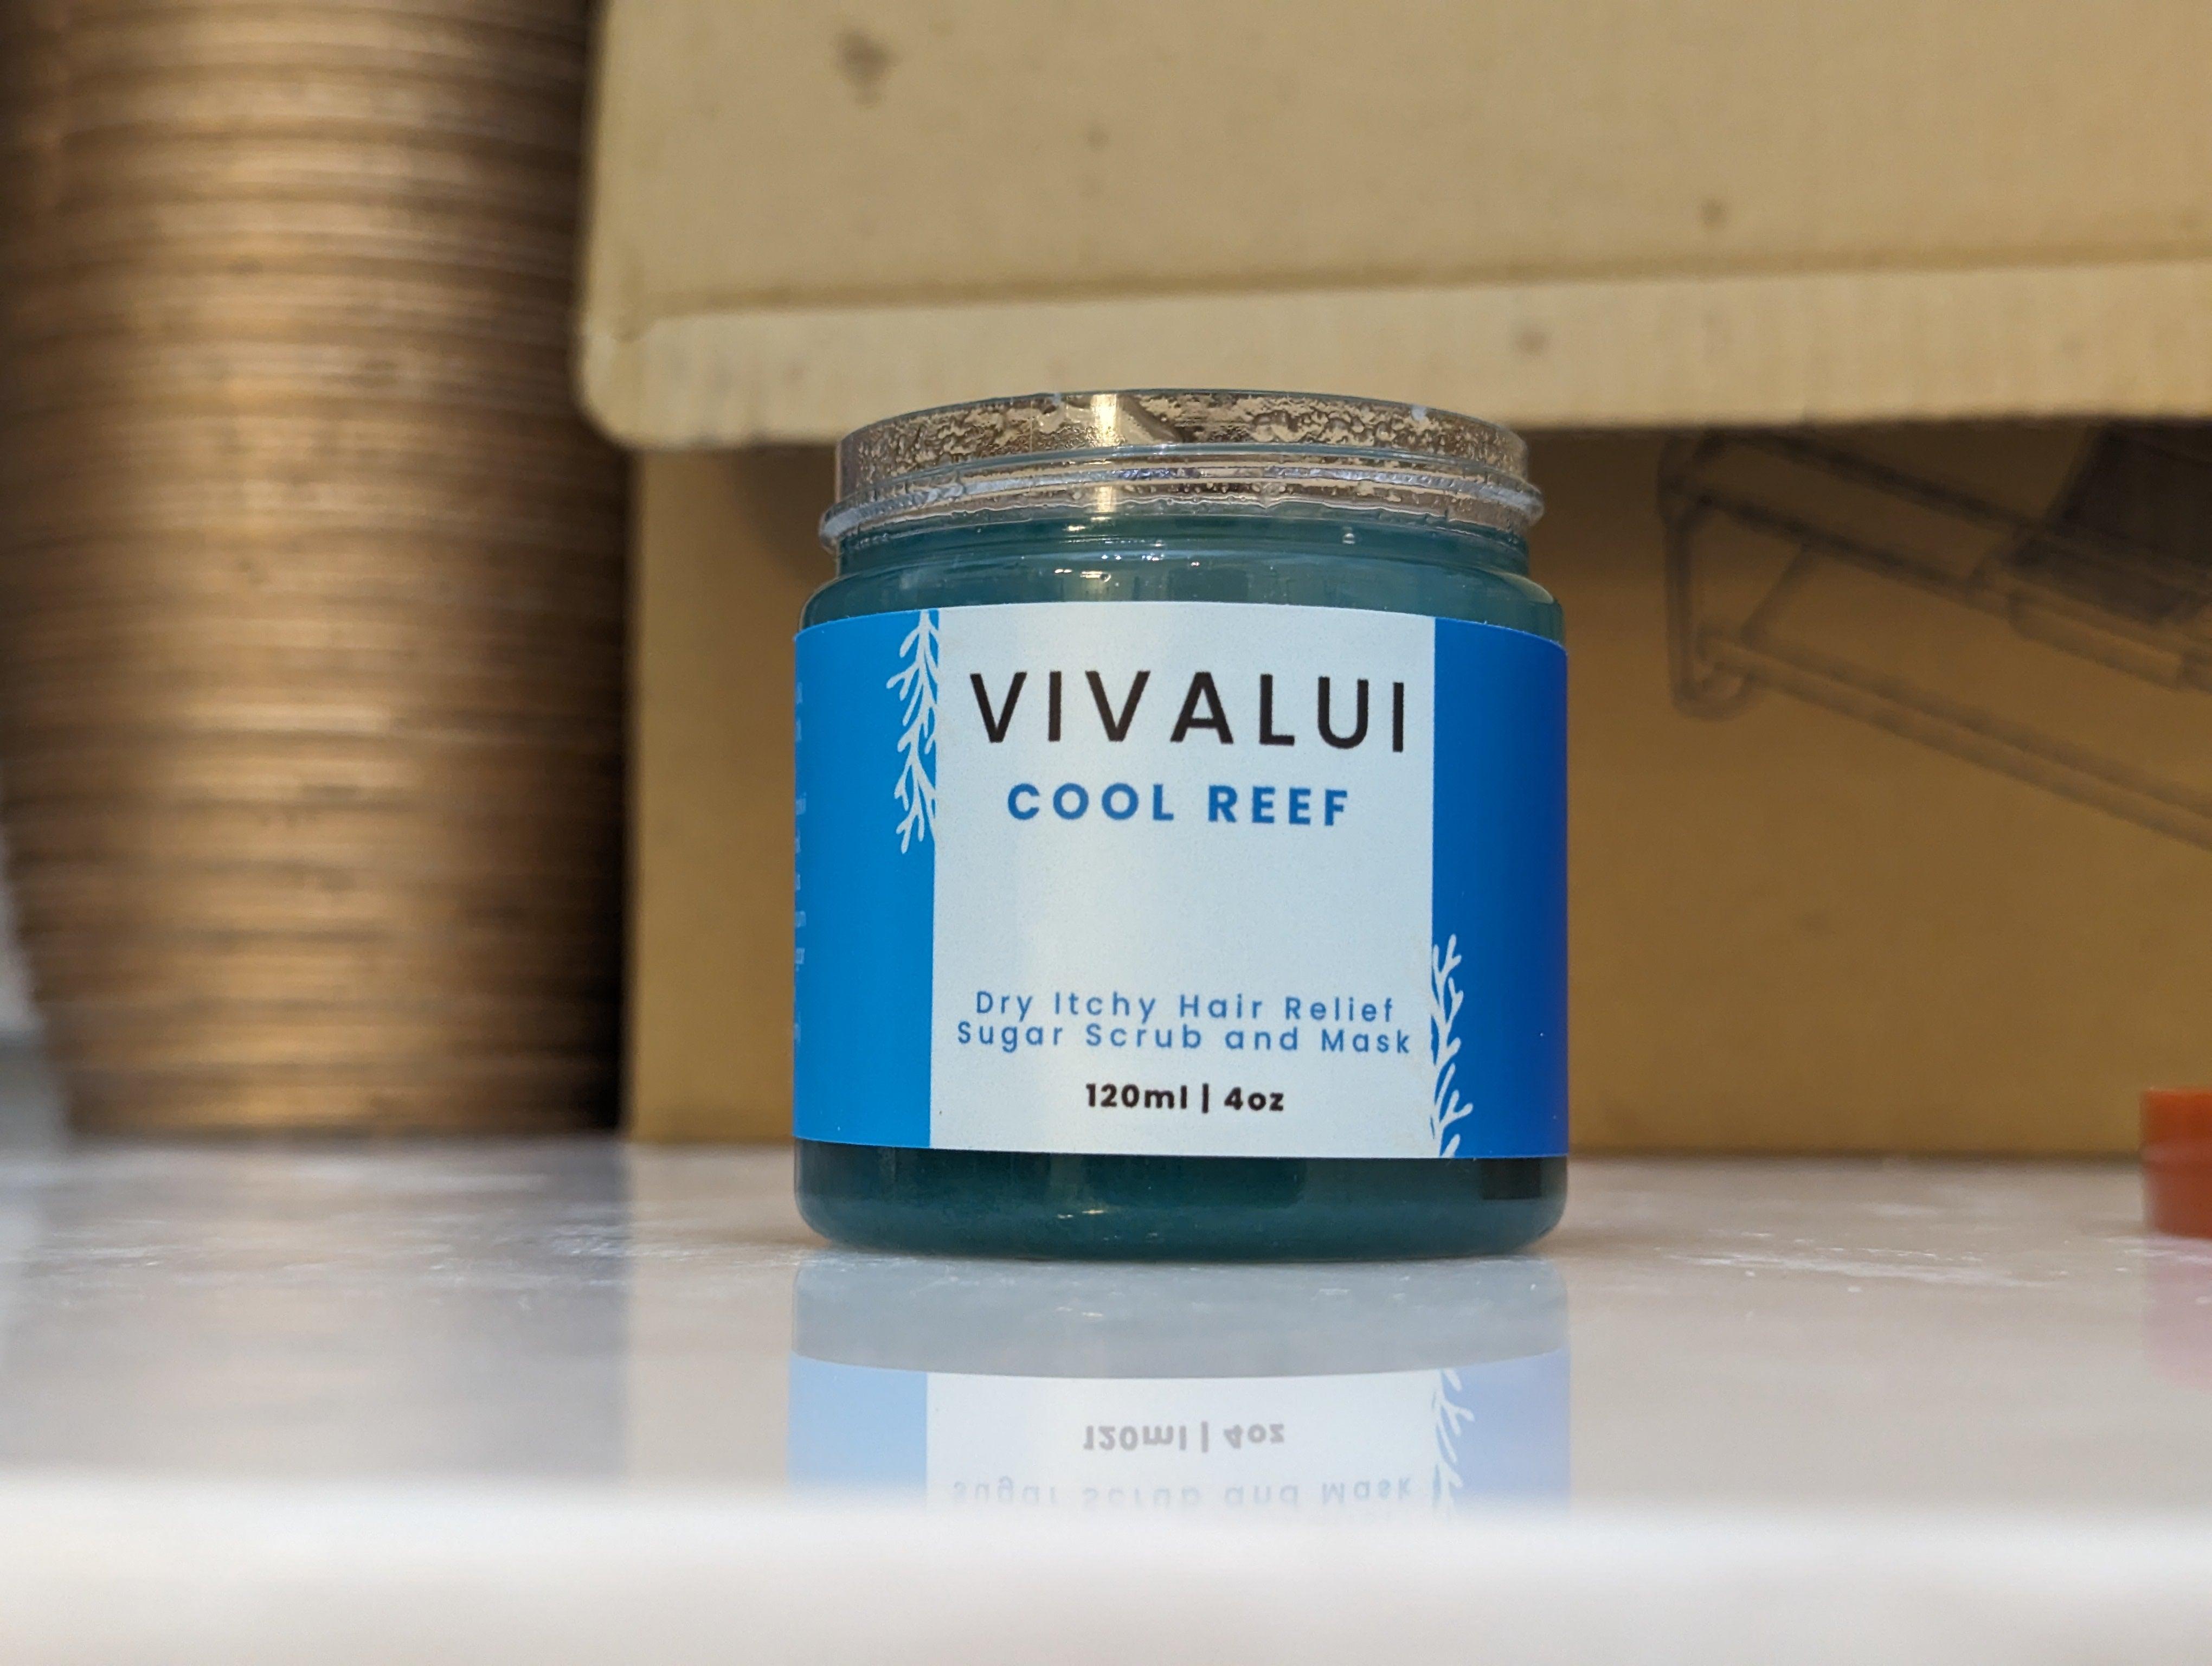 Vivalui cool reef dry itchy hair and scalp relief sugar scrub and mask - VIVALUI